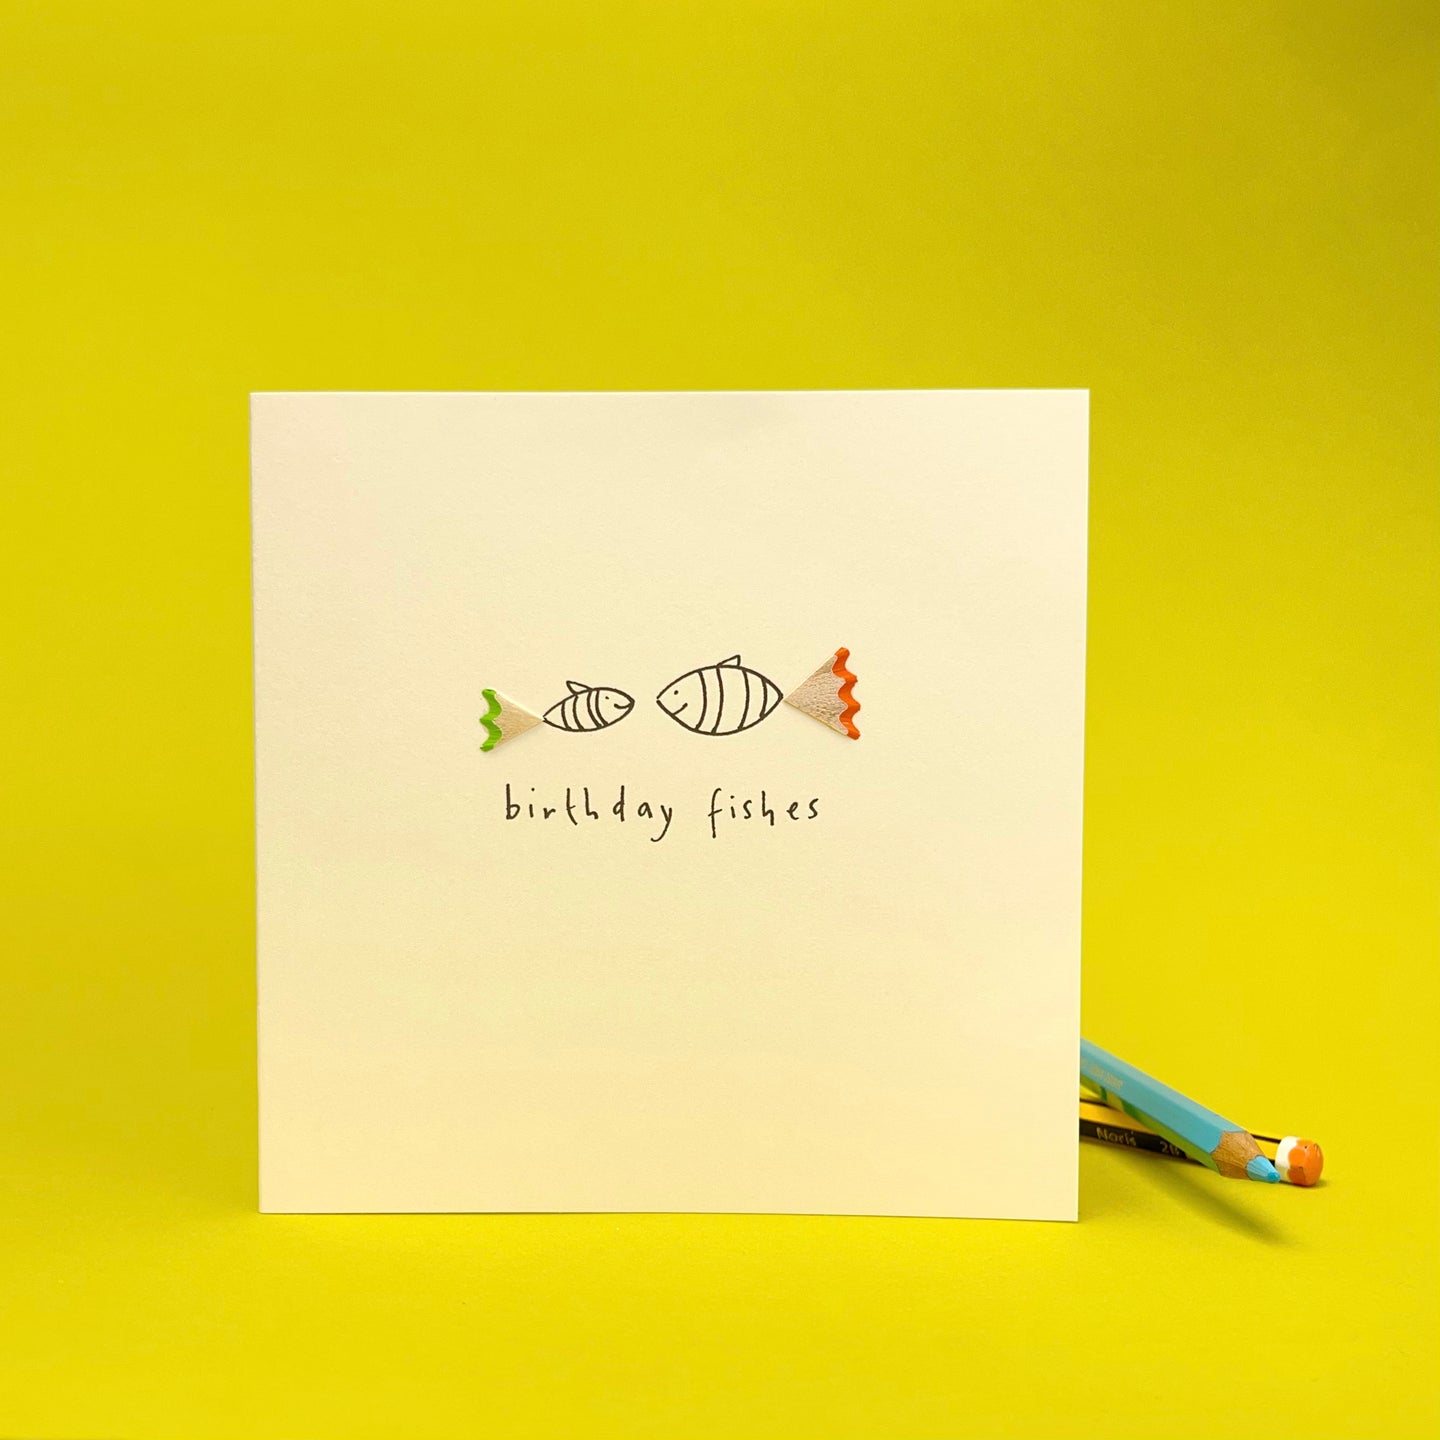 Greeting Card - birthday fishes